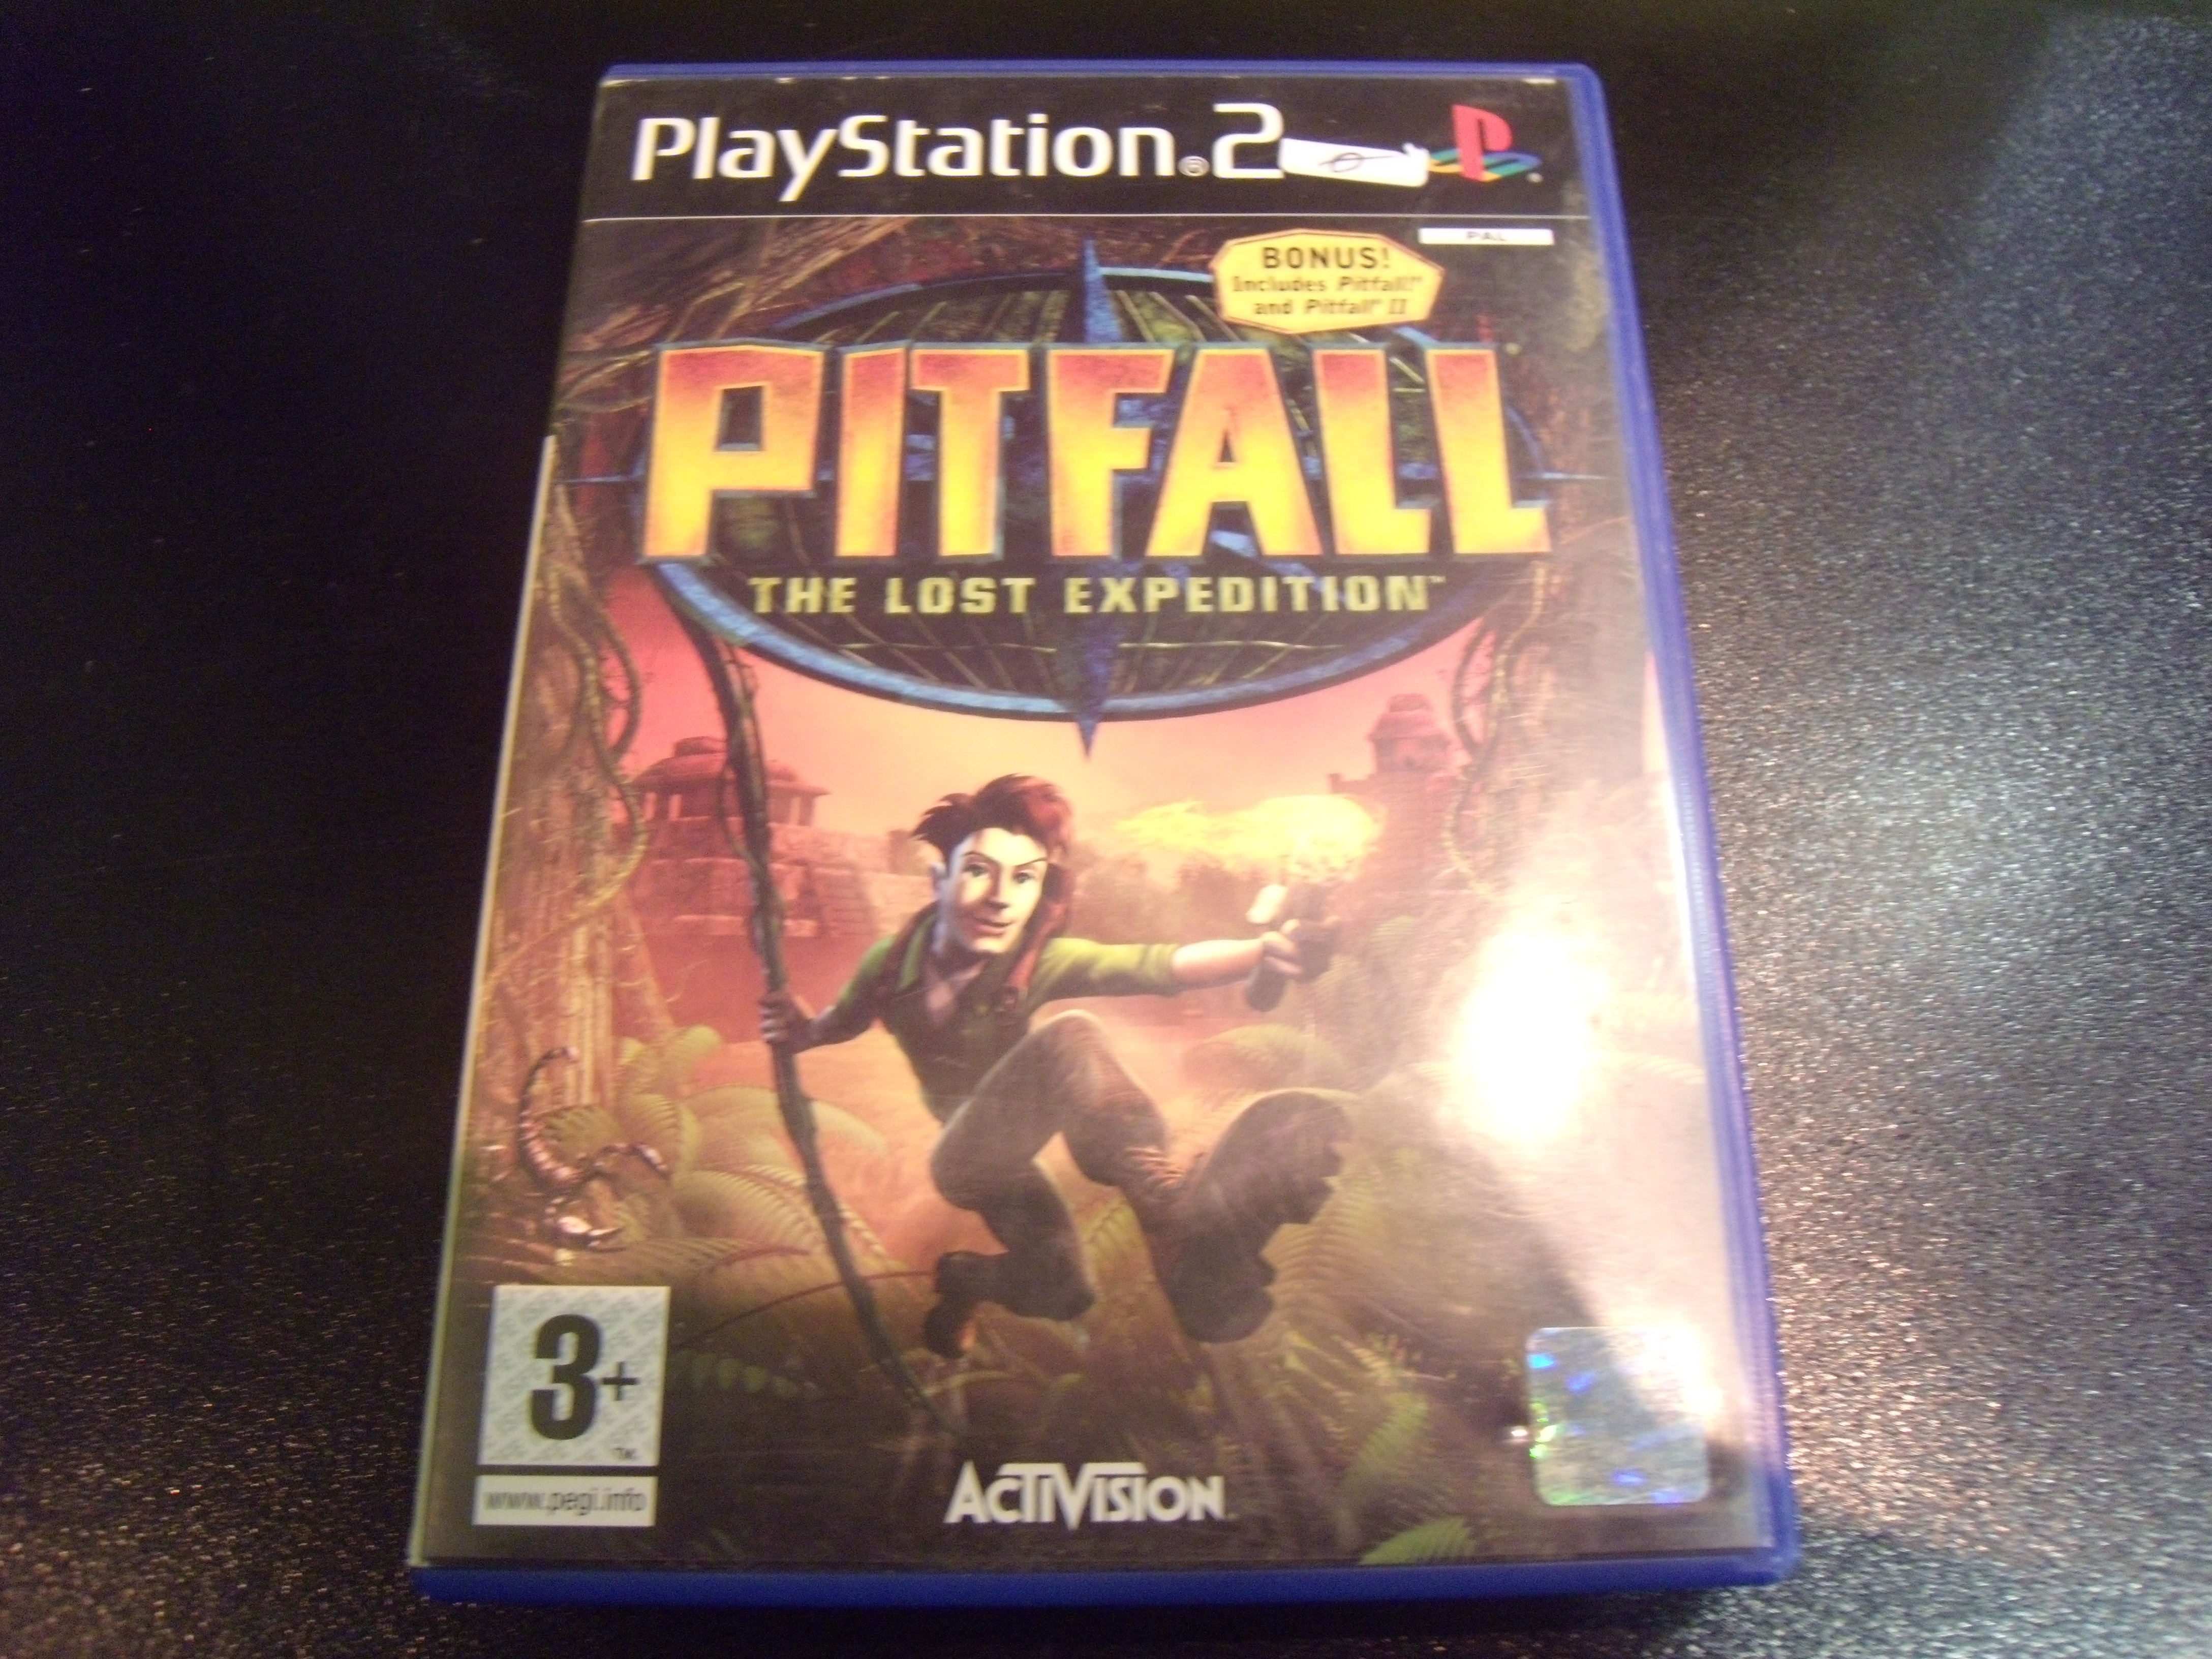 Pitfall The lost expedition -pal-